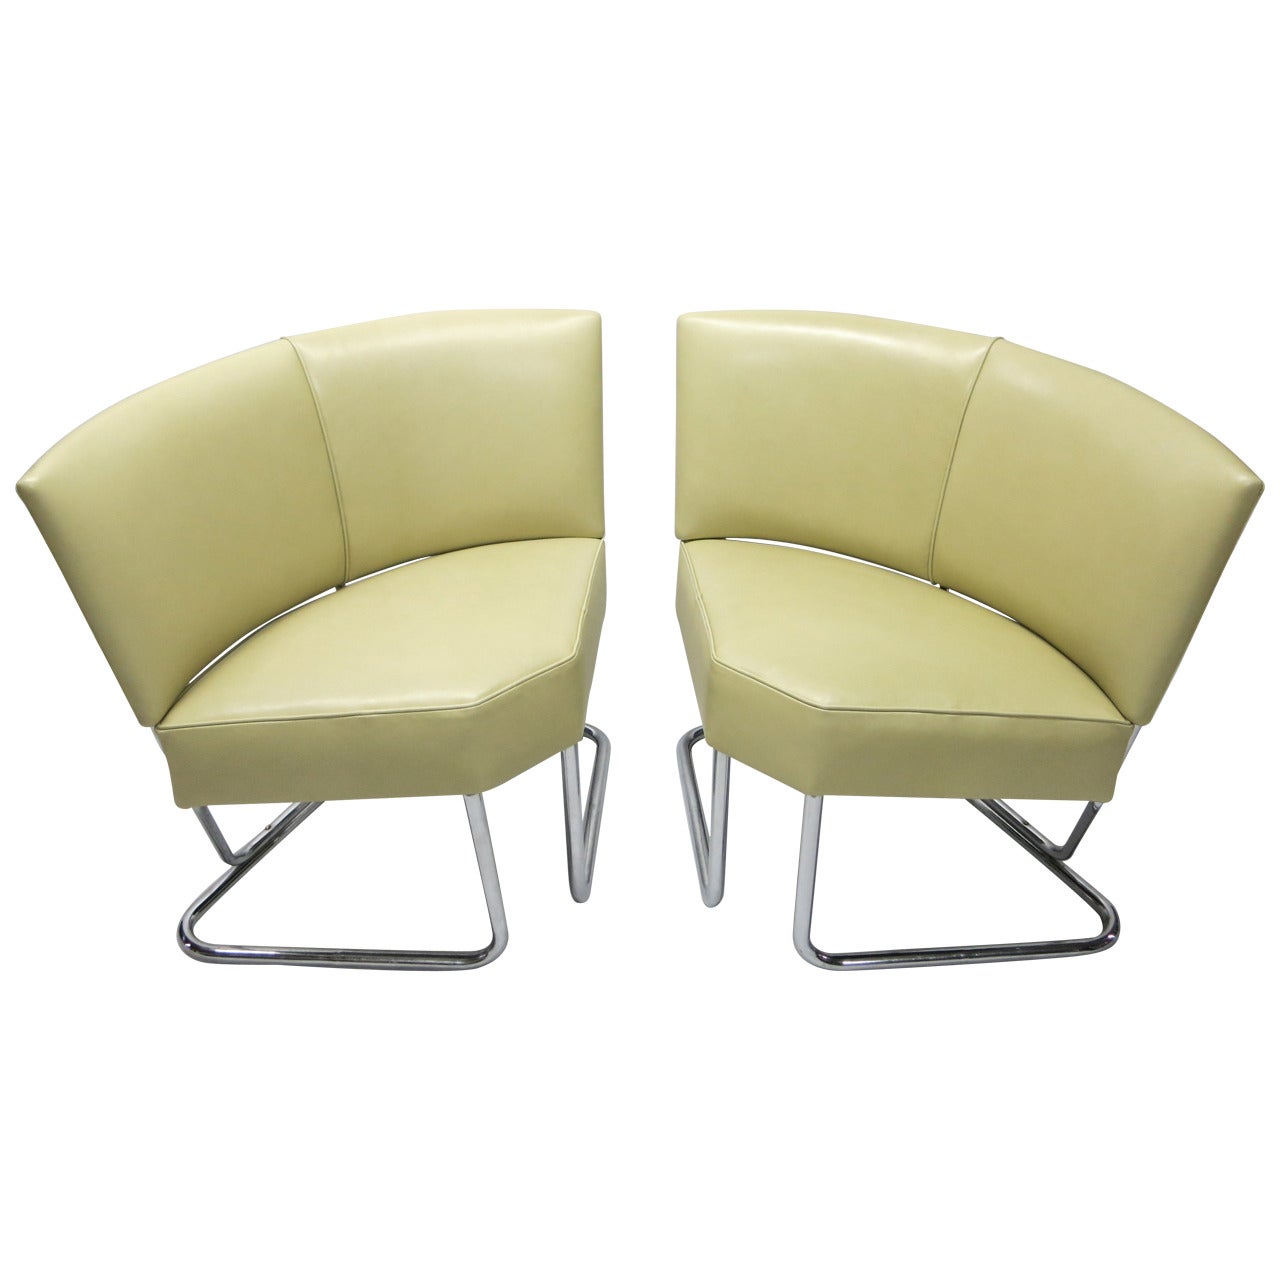 Pair or Arched Back Chairs by Thonet, USA Circa 1940